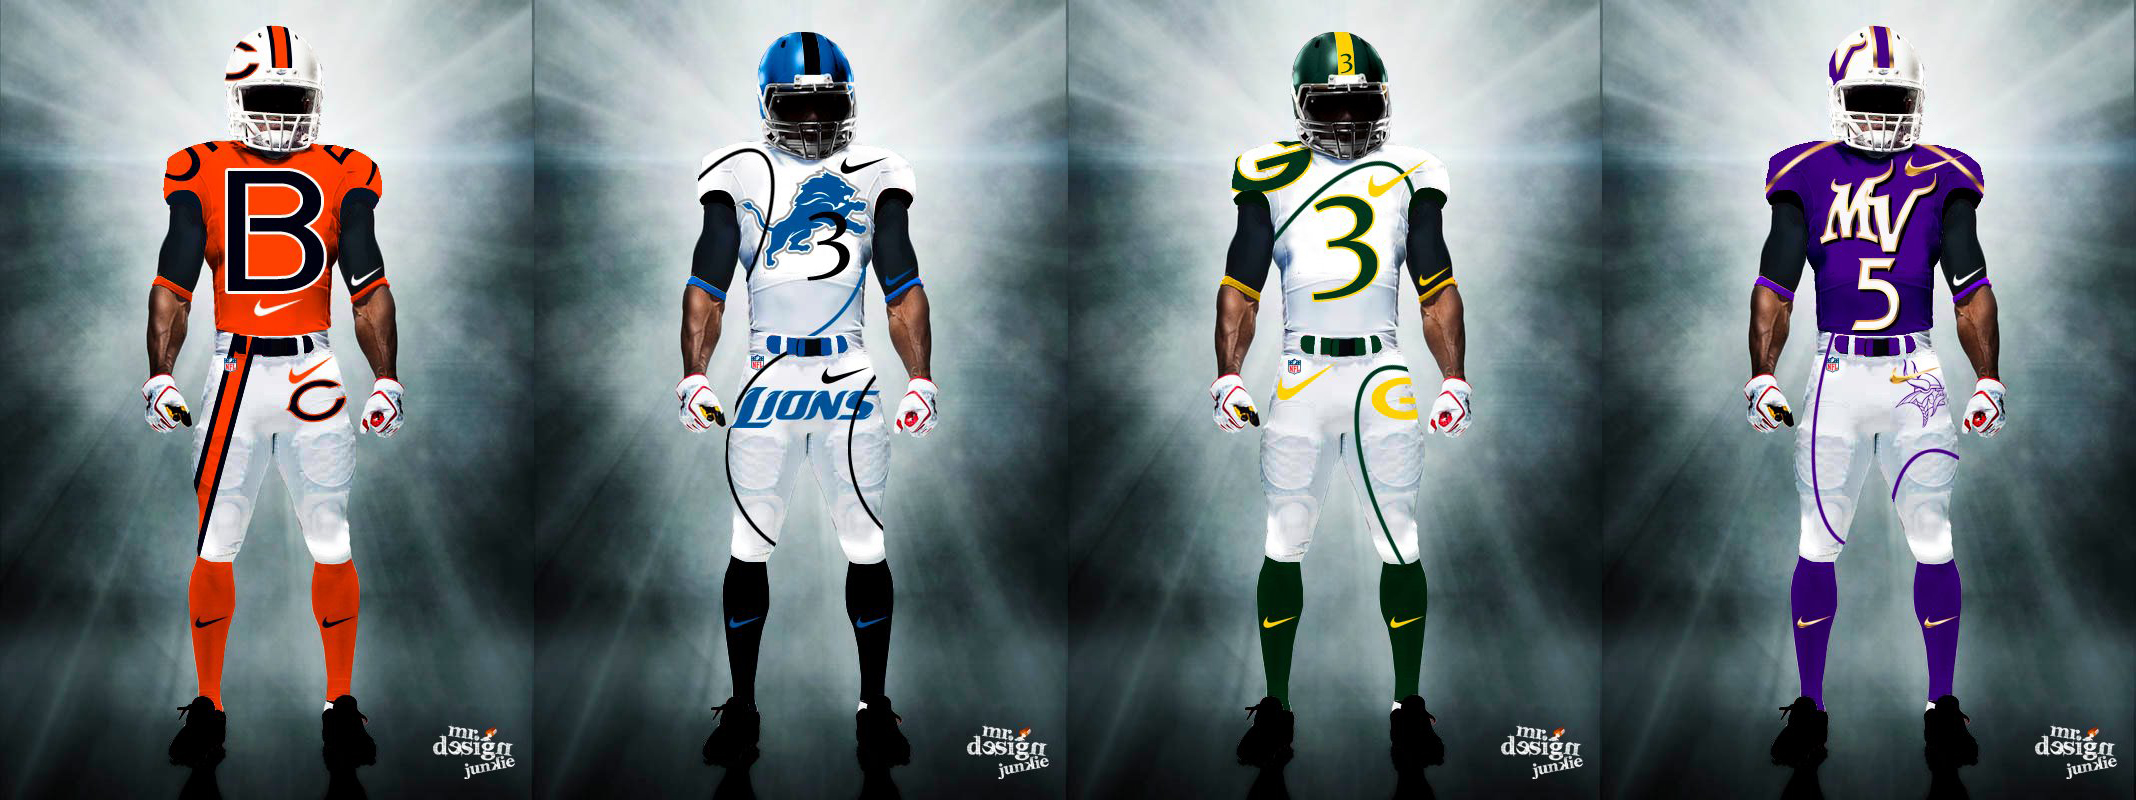 Pin on Uniforms Concepts